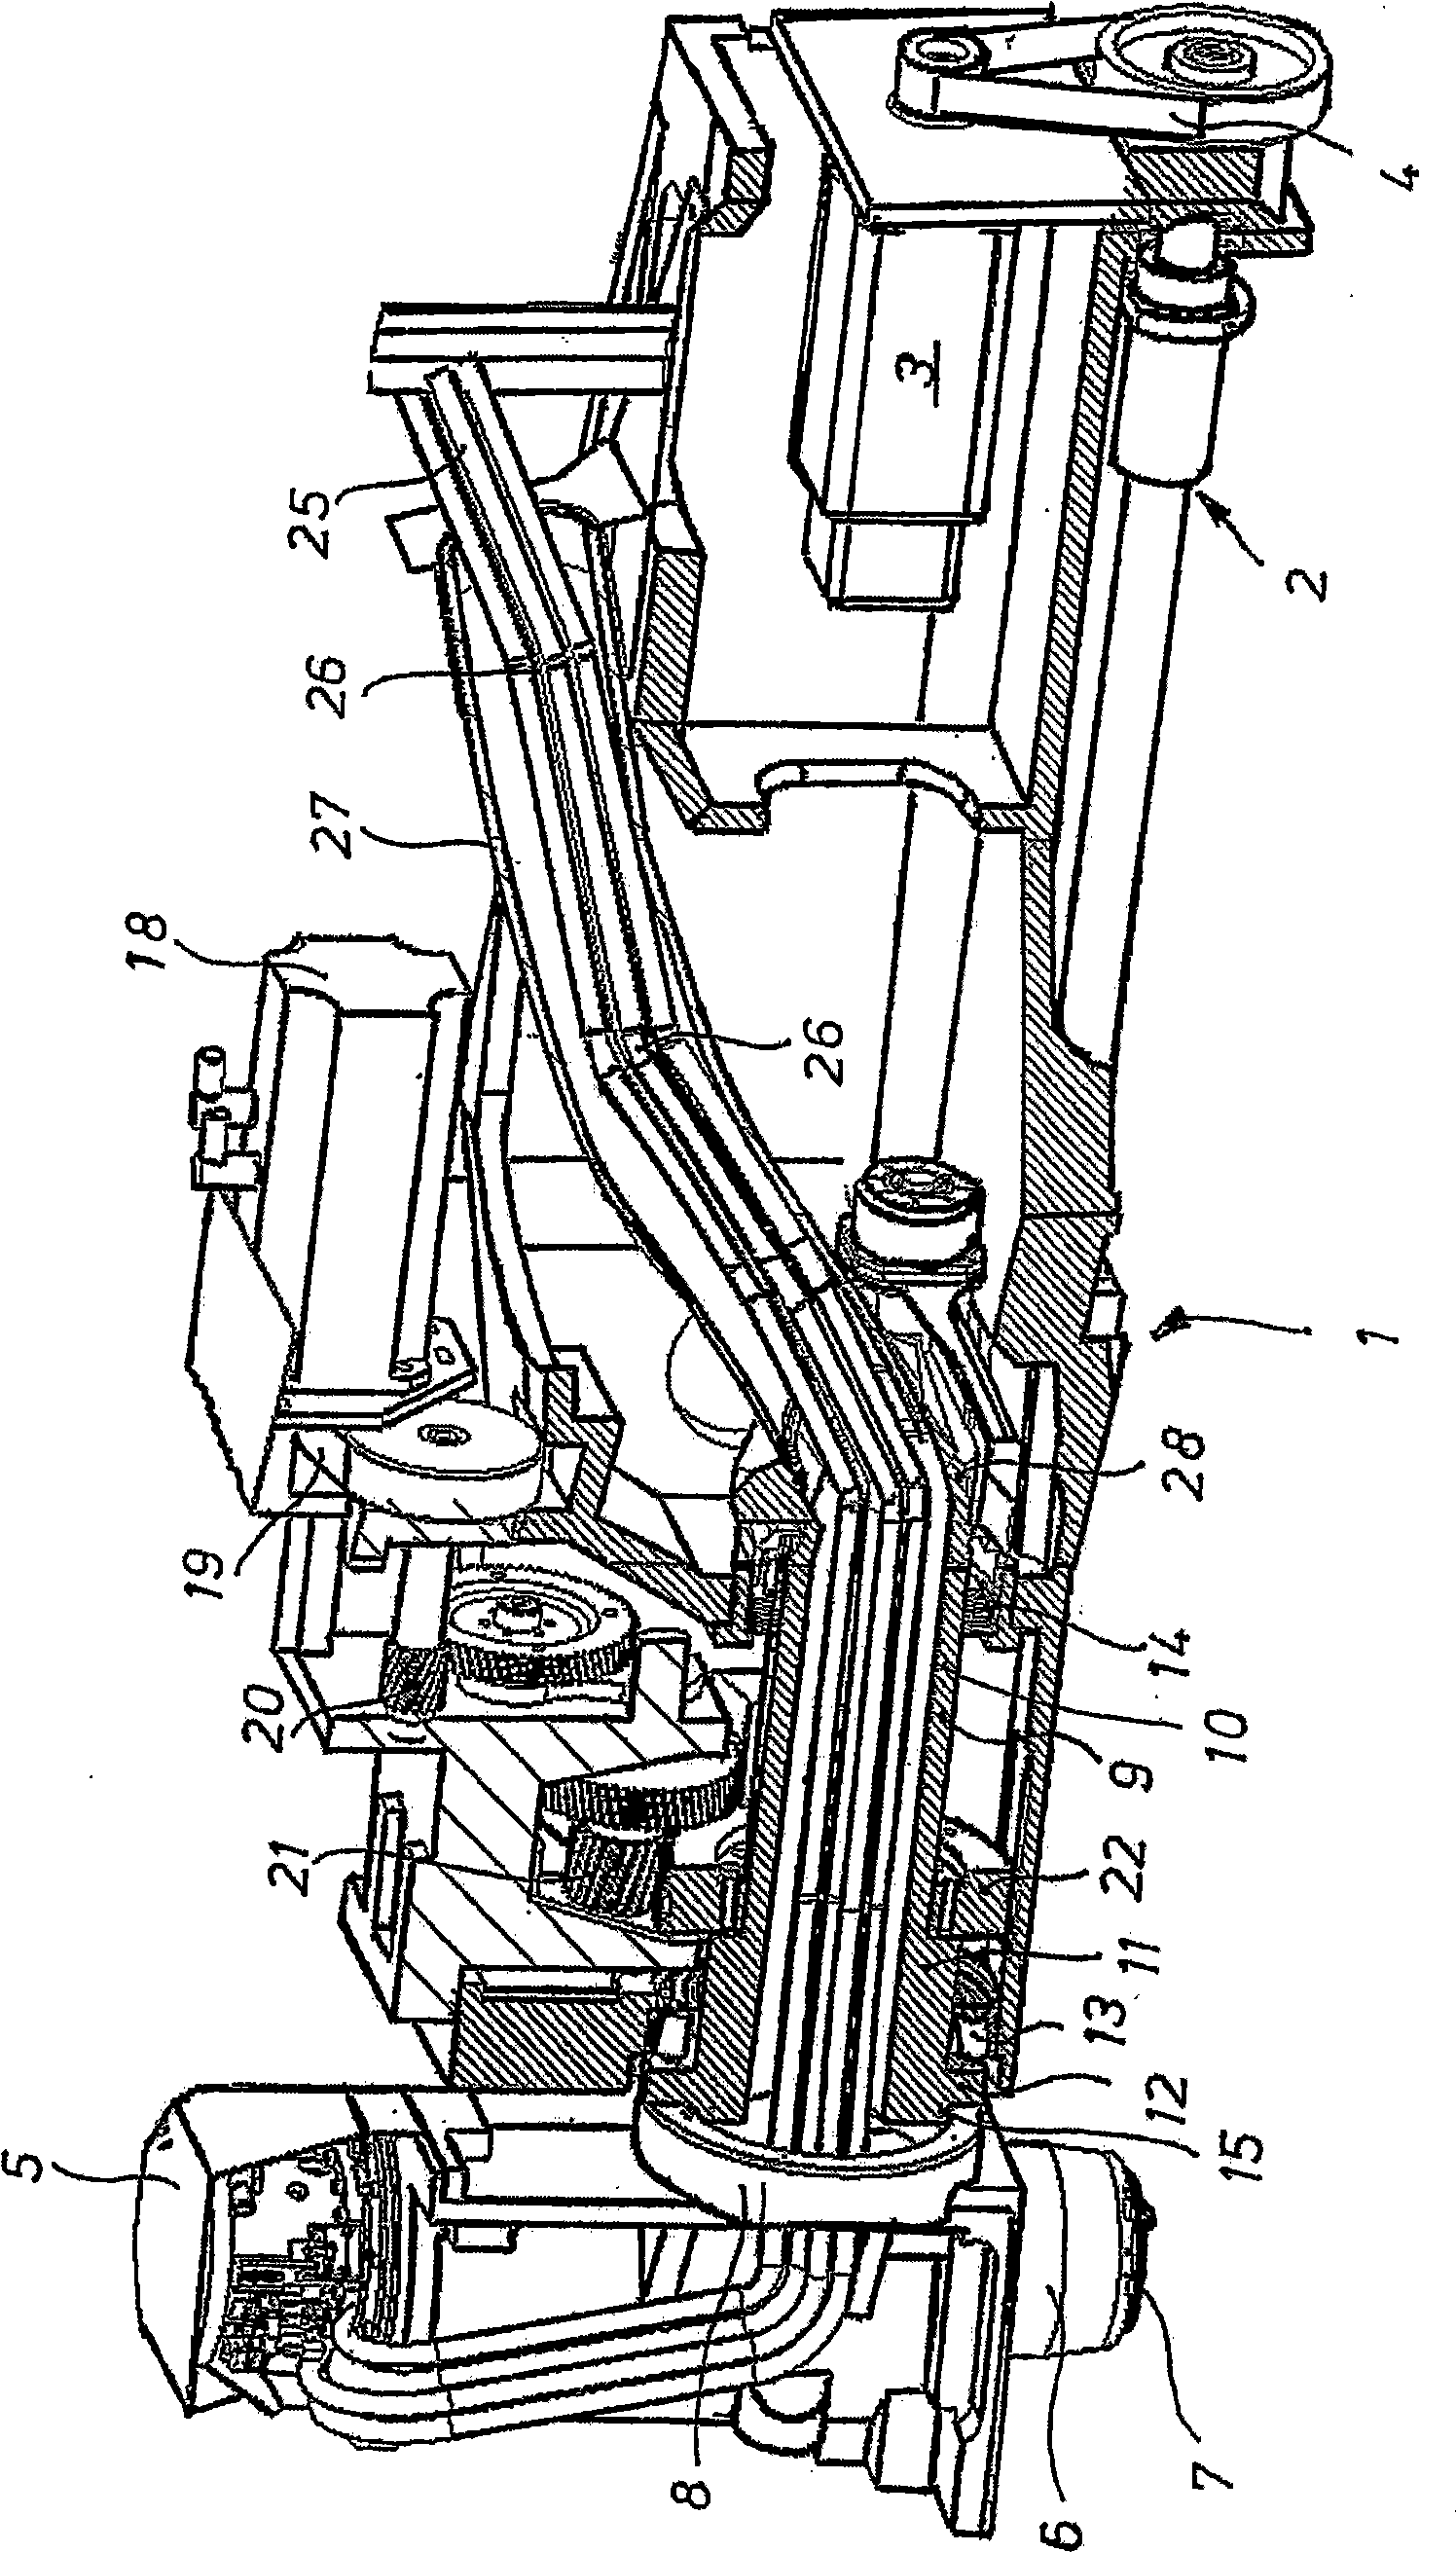 Machining unit for a milling and drilling machine